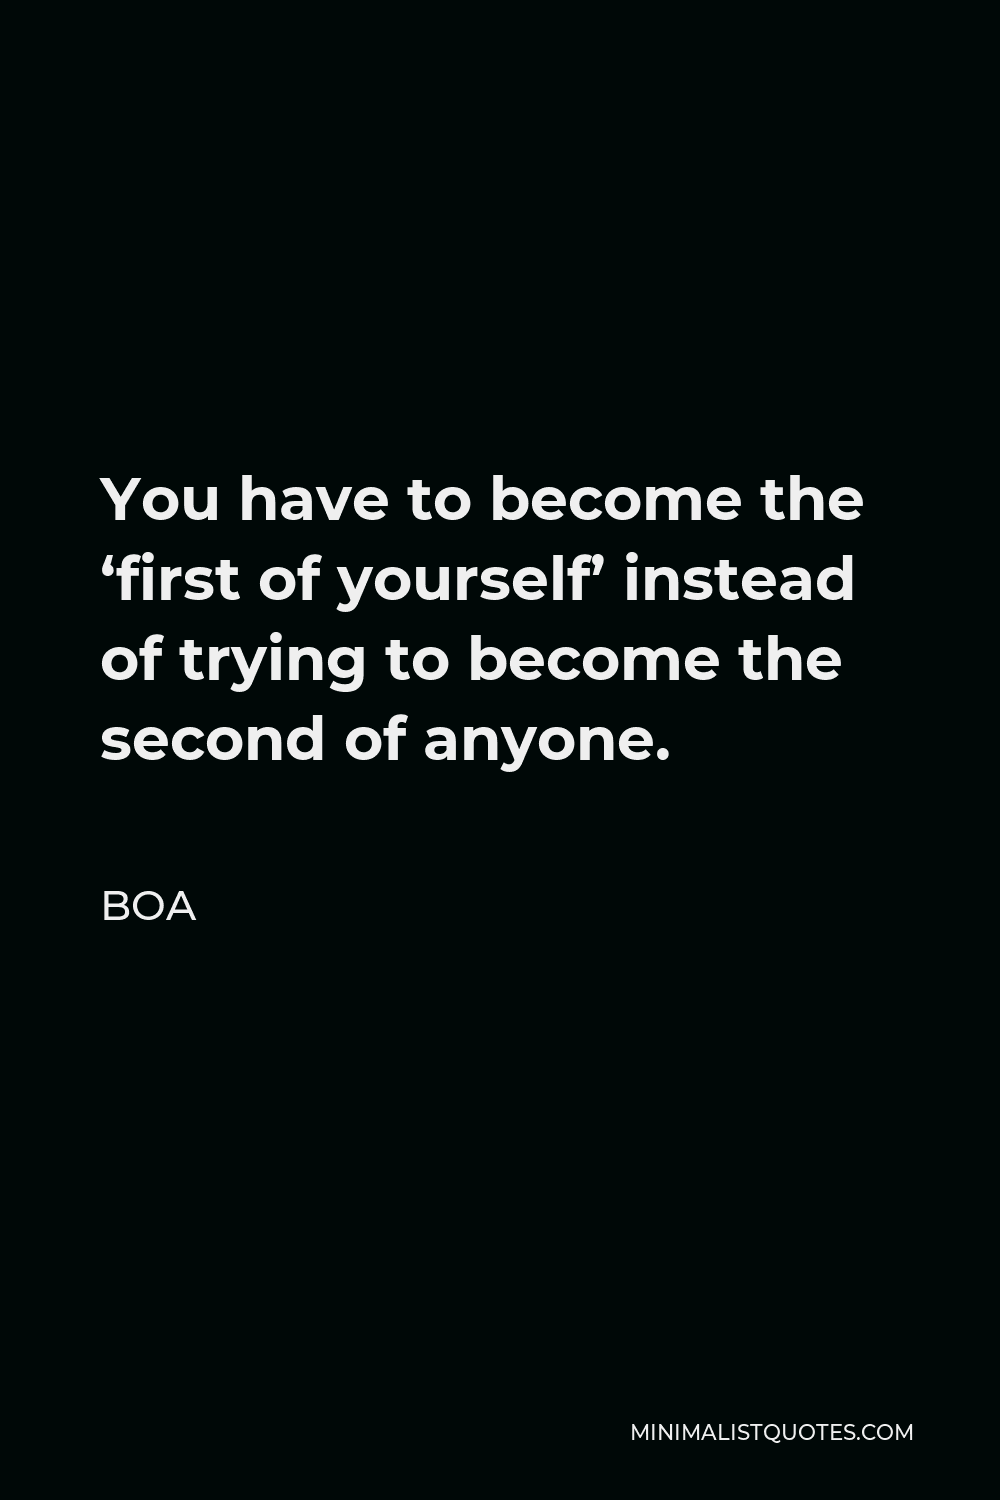 BoA Quote - You have to become the ‘first of yourself’ instead of trying to become the second of anyone.